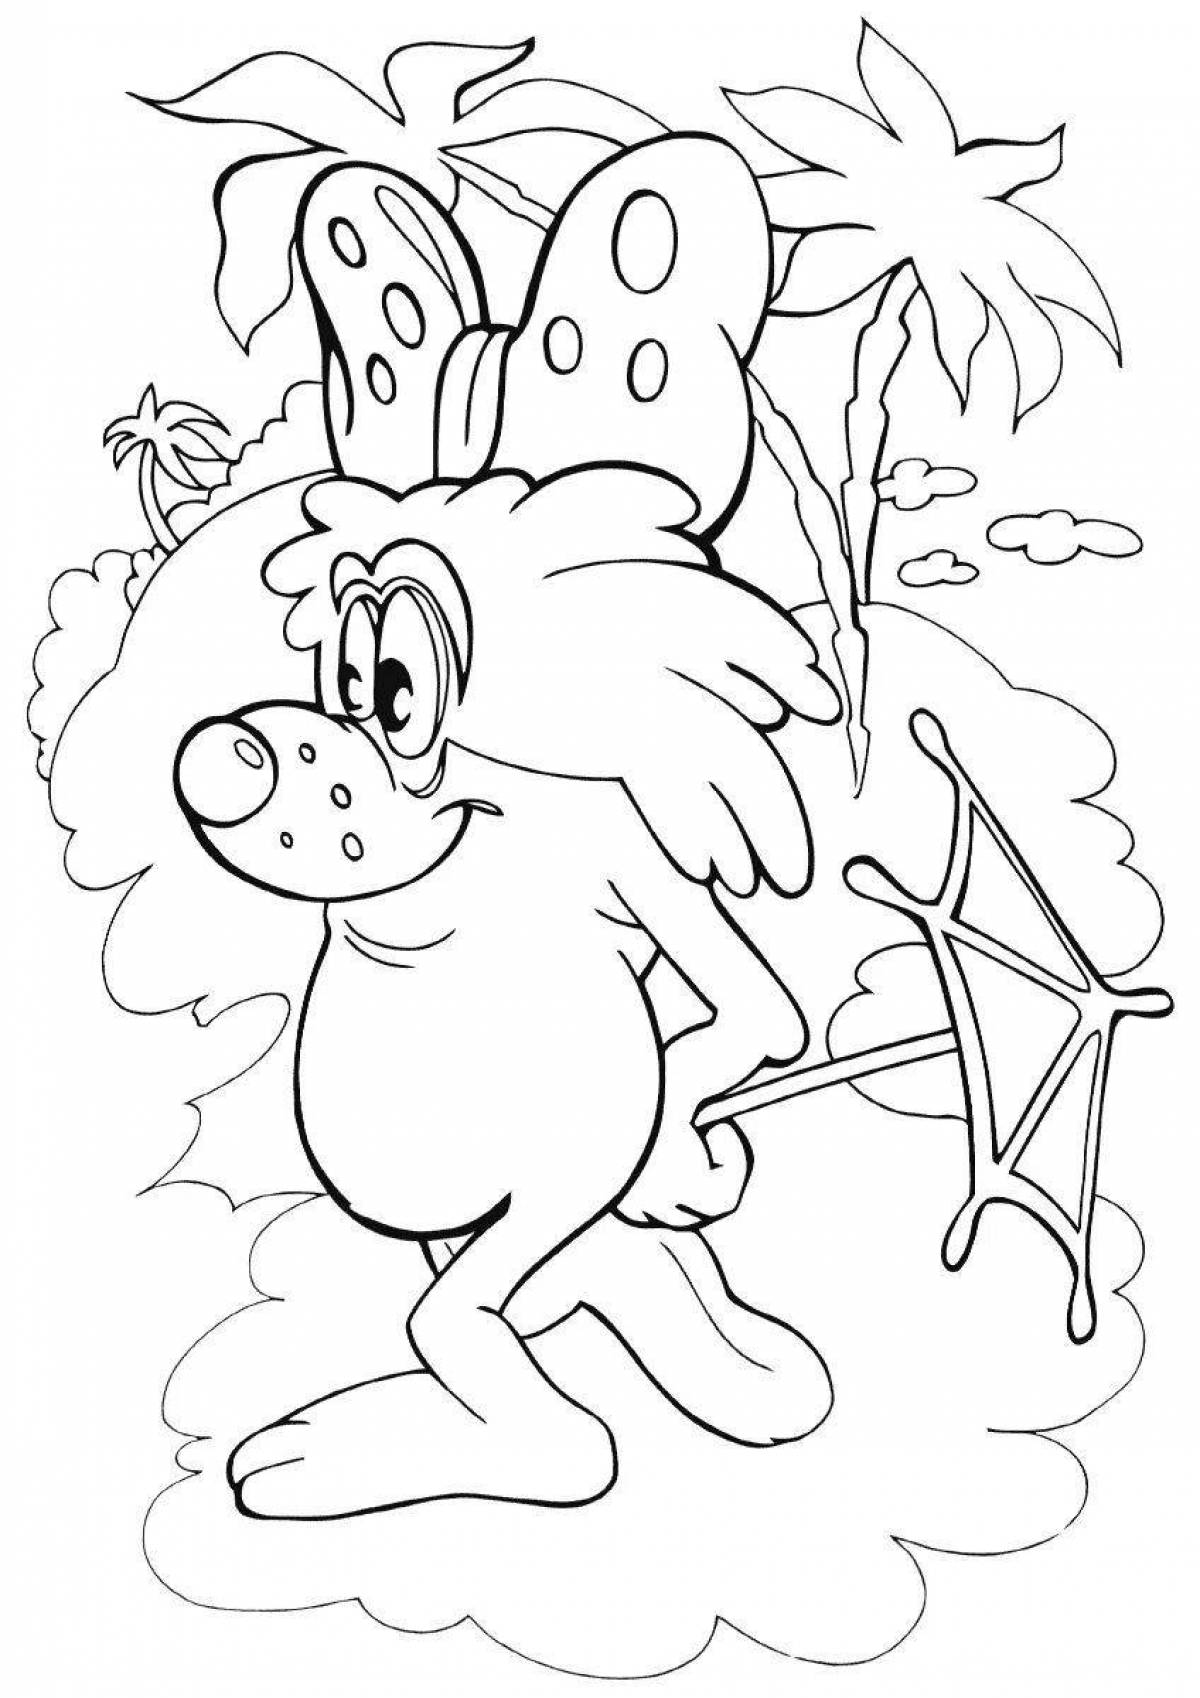 Coloring expression coloring page создайте раскраску из картинки